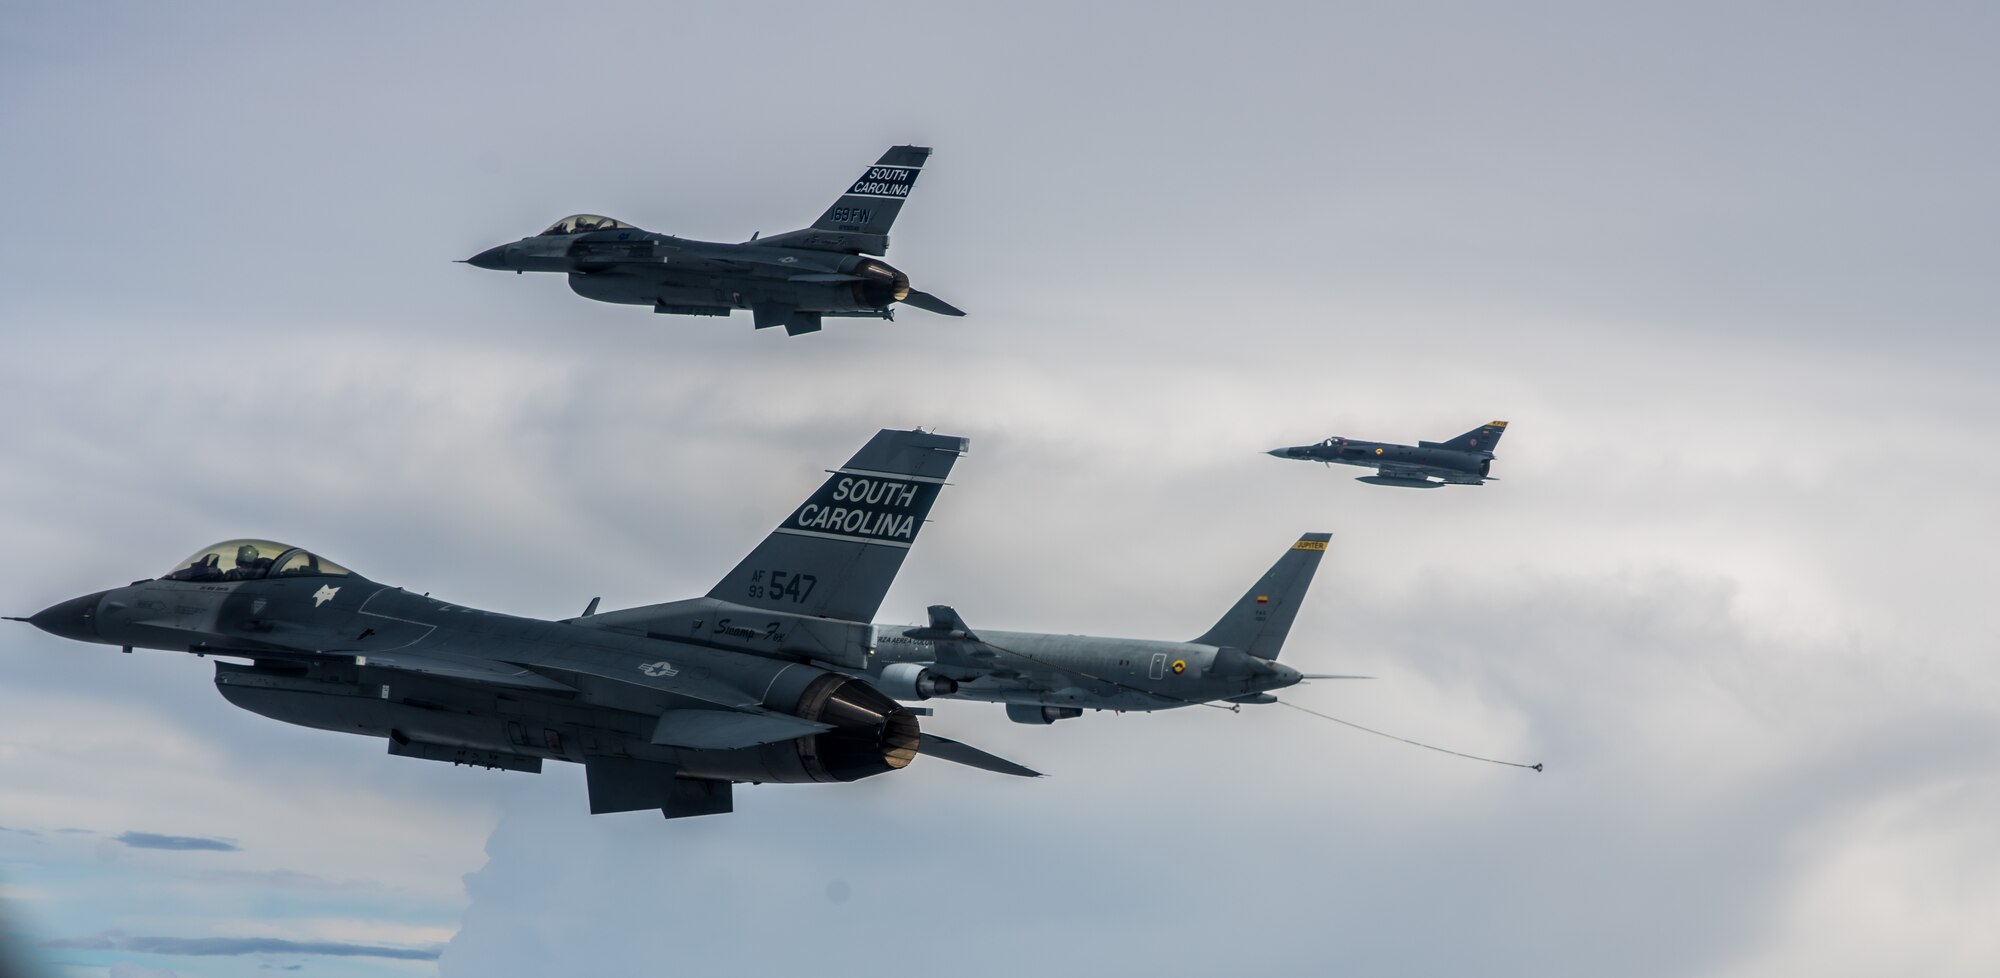 Two South Carolina Air National Guard F-16s fly alongside a Colombian air force Kfir and KC-767 tanker aircraft during a training flight Aug. 12 over Colombia. Nearly 100 Airmen and six F-16s from the 169th Fighter Wing at McEntire Air National Guard Base are participating in the combined air operation engagement, which is the first major joint-air engagement opportunity under the auspices of the South Carolina's State Partnership Program with Colombia. The exercise allows the U.S. and Colombian airmen to share tactics, techniques, and procedures on many subjects including defensive air operations, operations coordination and scheduling, and best maintenance practices; all of which can be applied to maritime, littoral waters, over-land areas of operations, and defense of national territory. (U.S. Air Force photo by Maj. Matt Booth/Released)